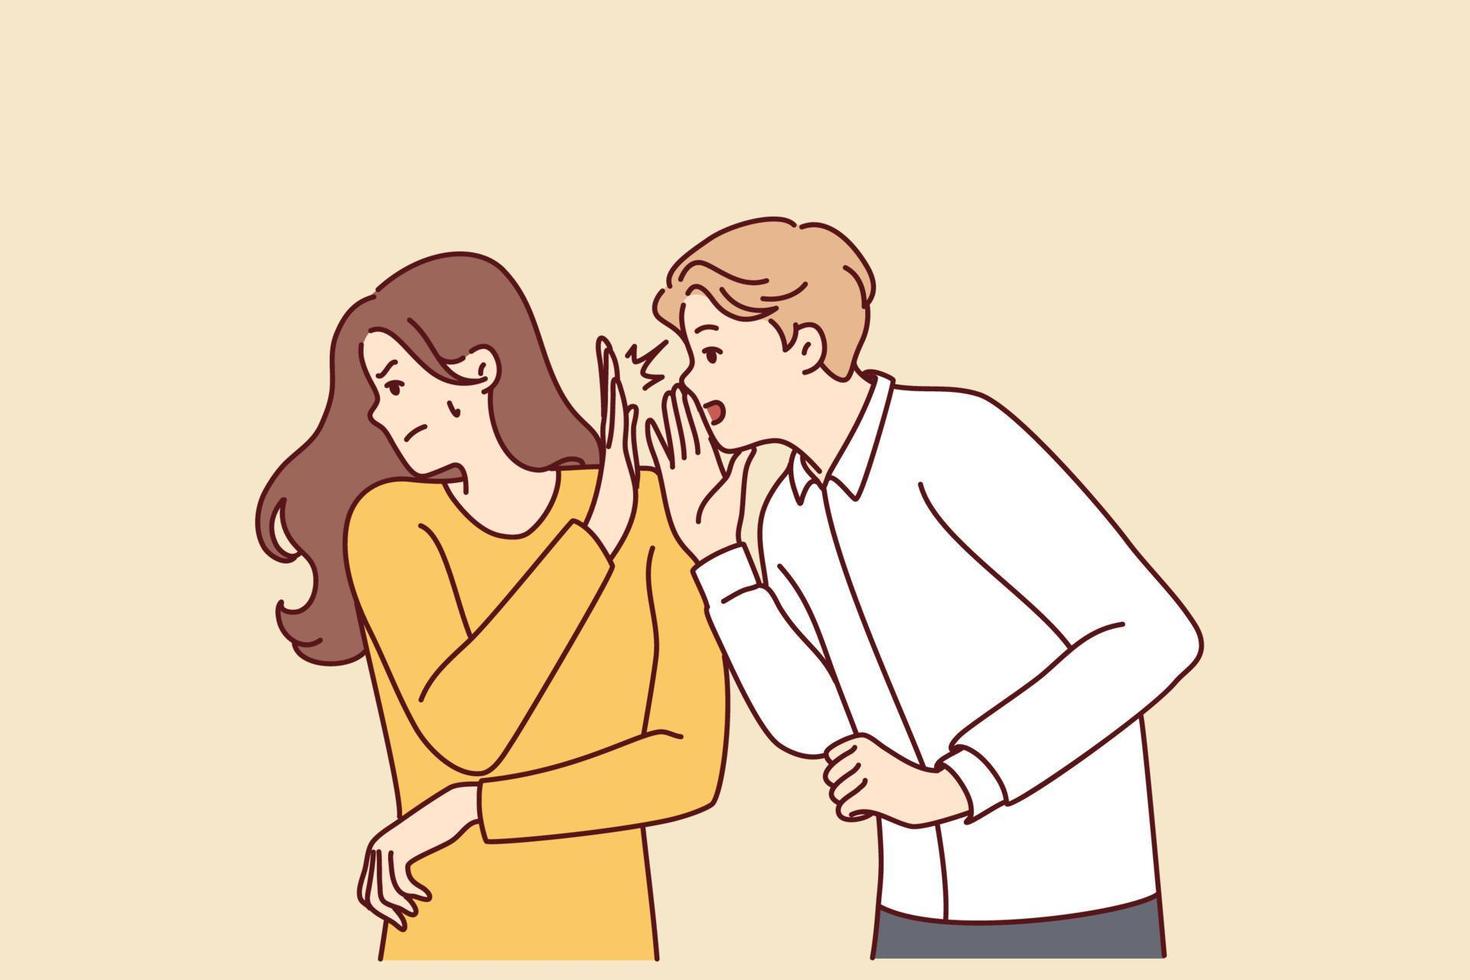 Self-sufficient woman turns away from screaming man after insults or unpleasant words. Girl shows stop sign with palm to guy who wants to tell secret or make obscene proposal. Flat vector illustration